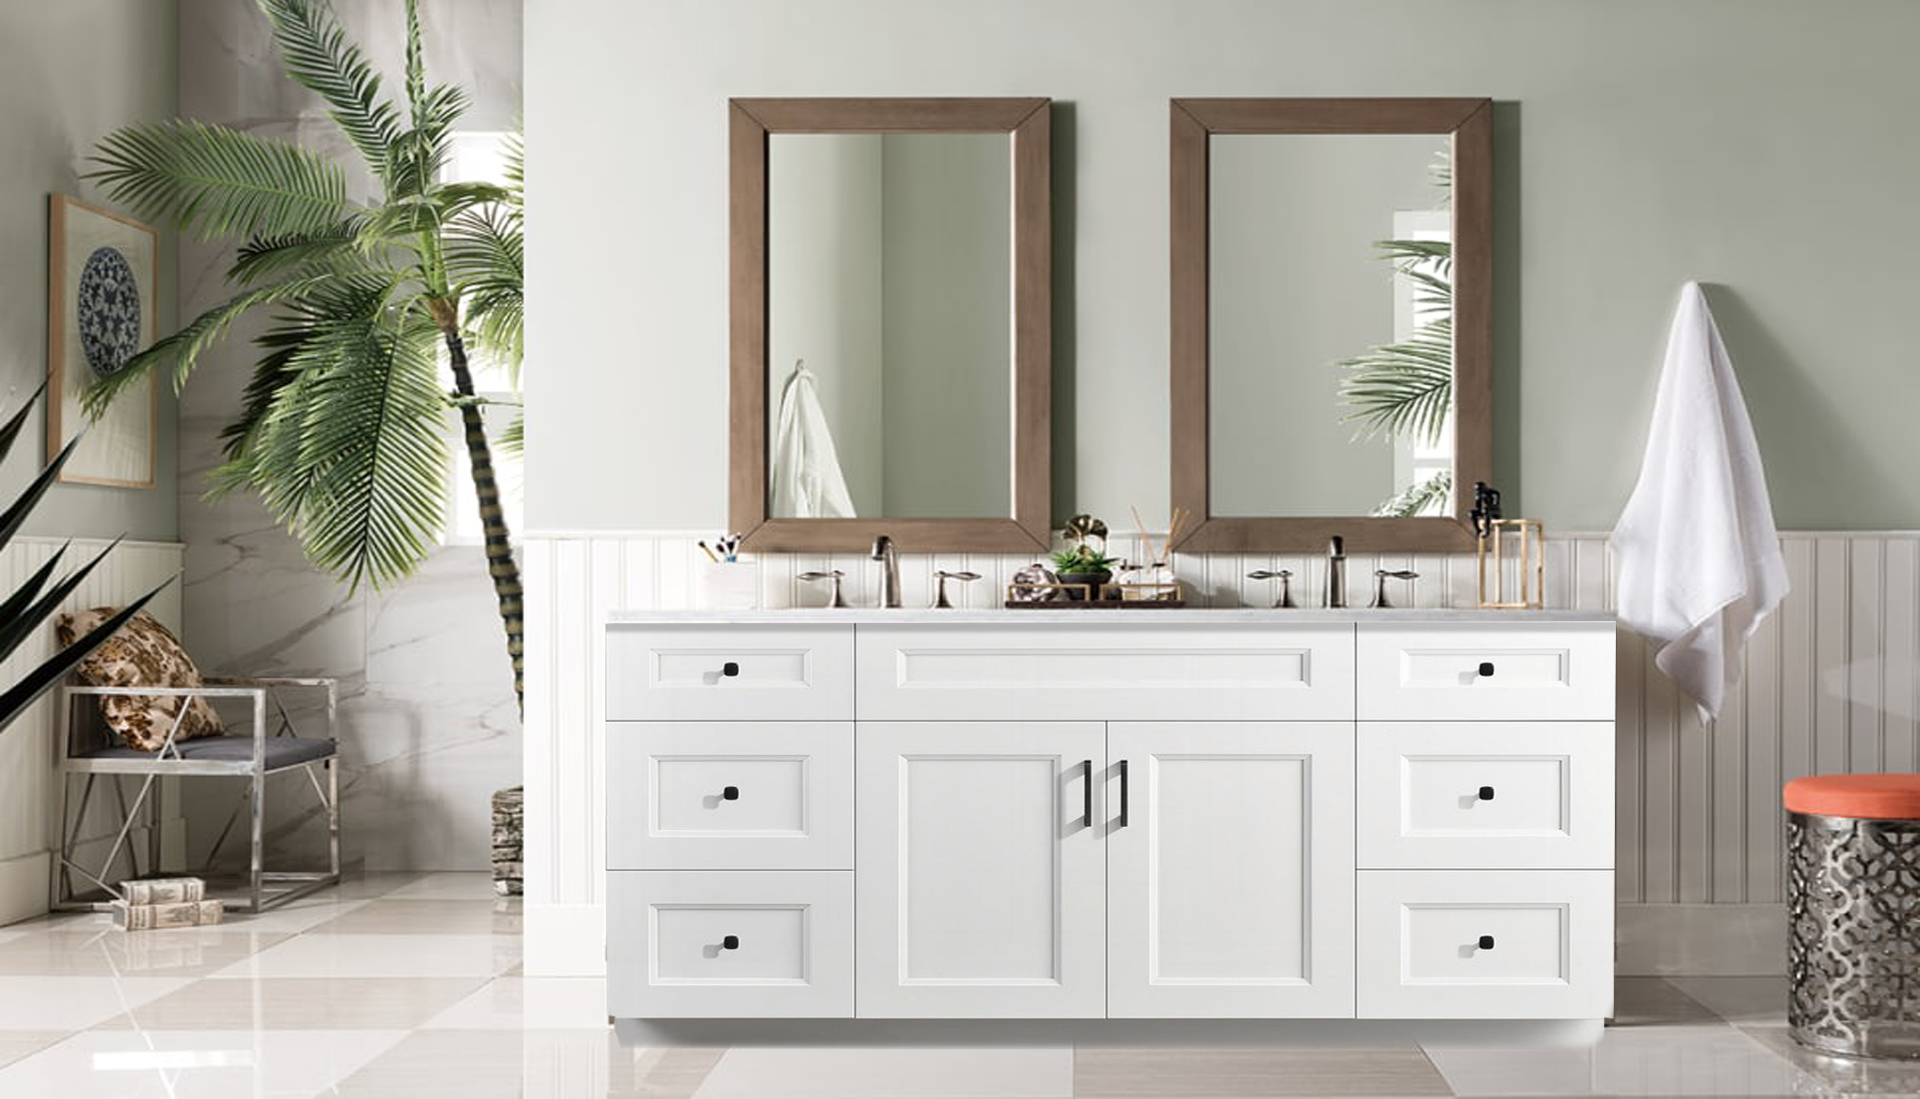 Transform Your Bathroom with Elegance and Style: Discover the Serena Vanity - Bhdepot 